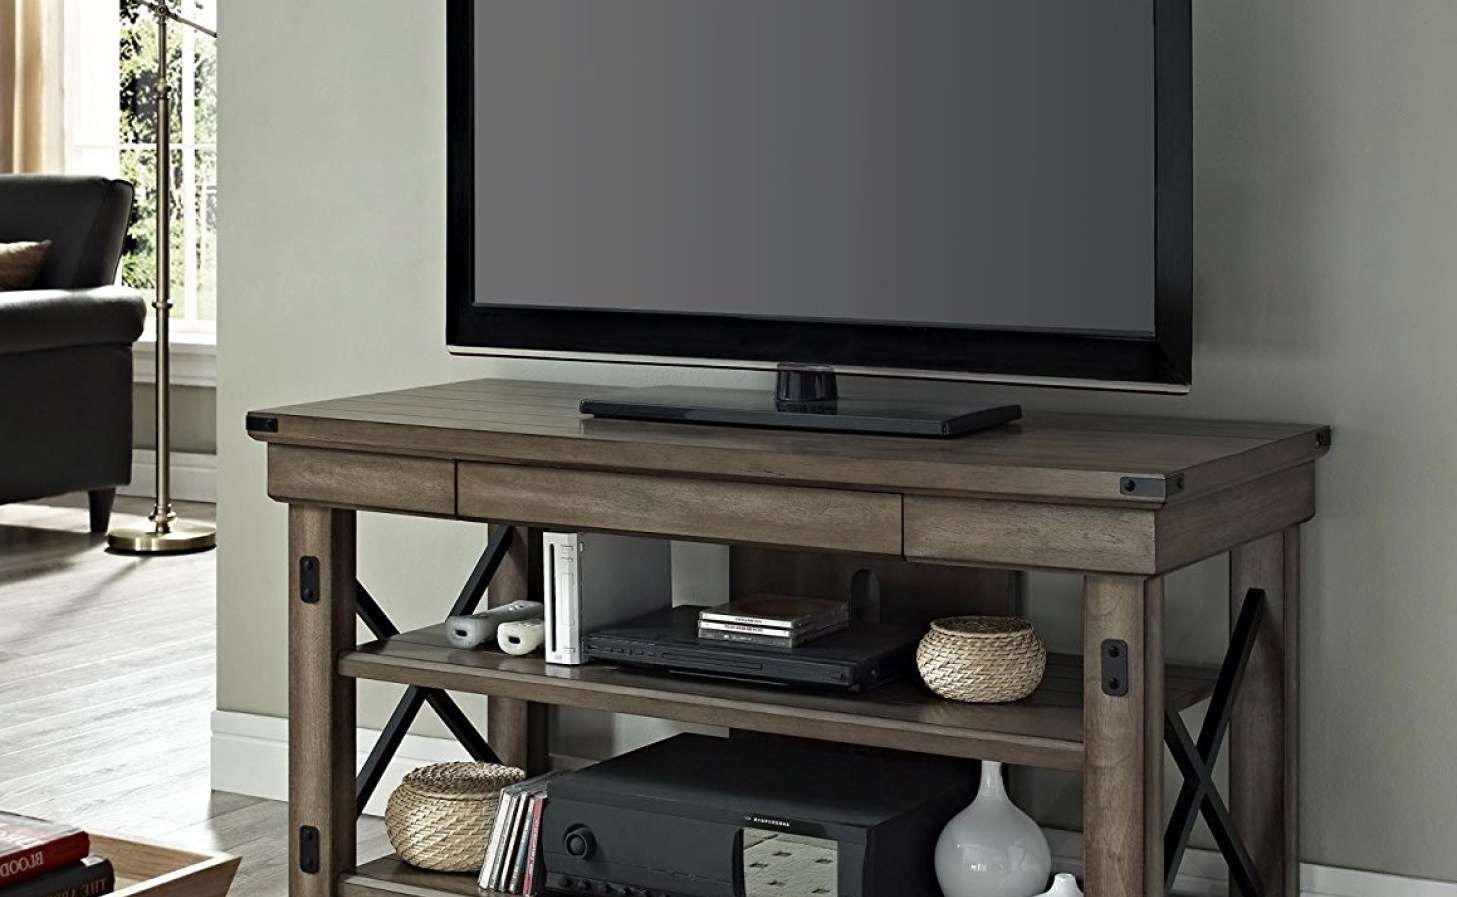 Tv : P P Wonderful Tv Stands For 70 Inch Tvs Refreshing Cheap Tv Regarding Tv Stands For 70 Inch Tvs (Gallery 13 of 20)